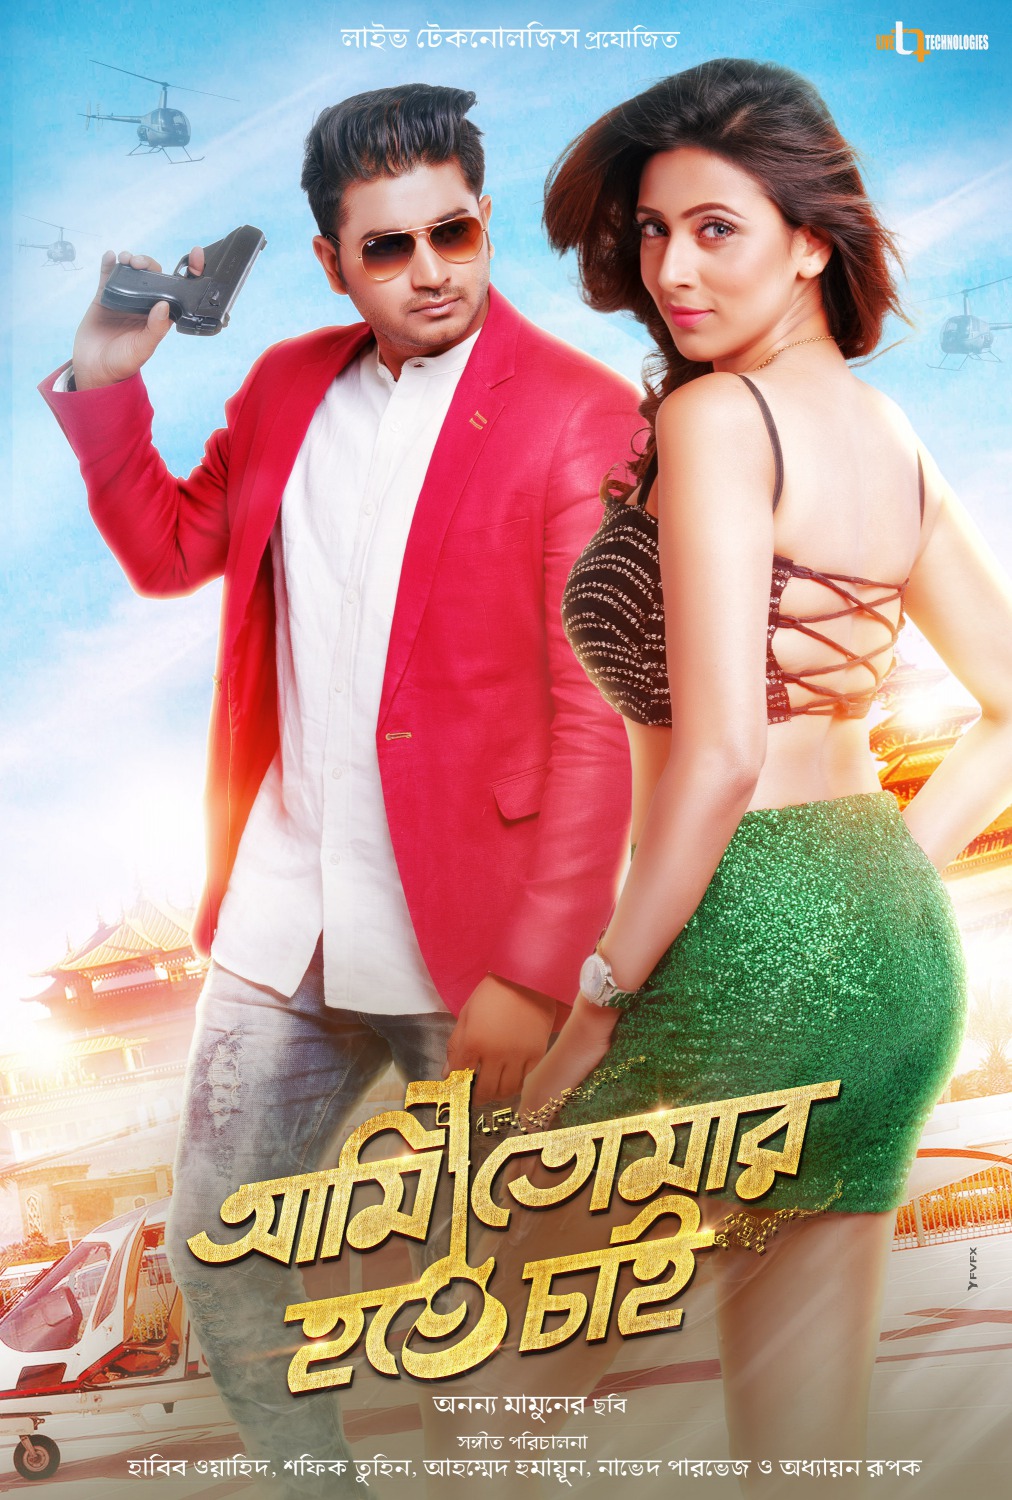 Extra Large Movie Poster Image for Ami Tomar Hote Chai (#11 of 11)